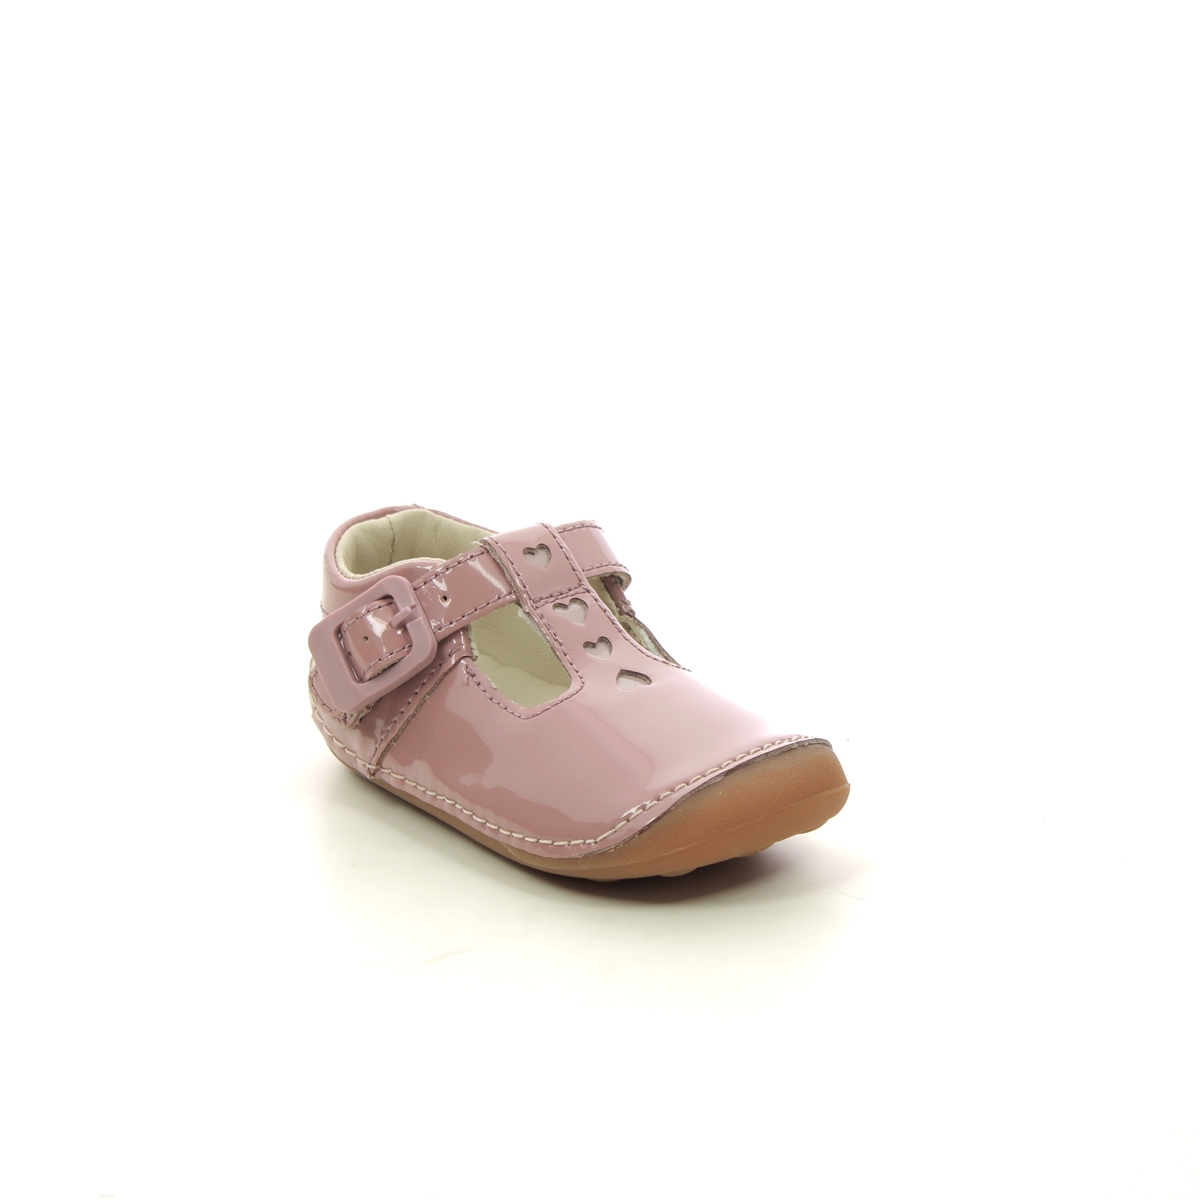 Clarks Tiny Beat T Pink Kids girls first and baby shoes 6940-86F in a Plain Leather in Size 5